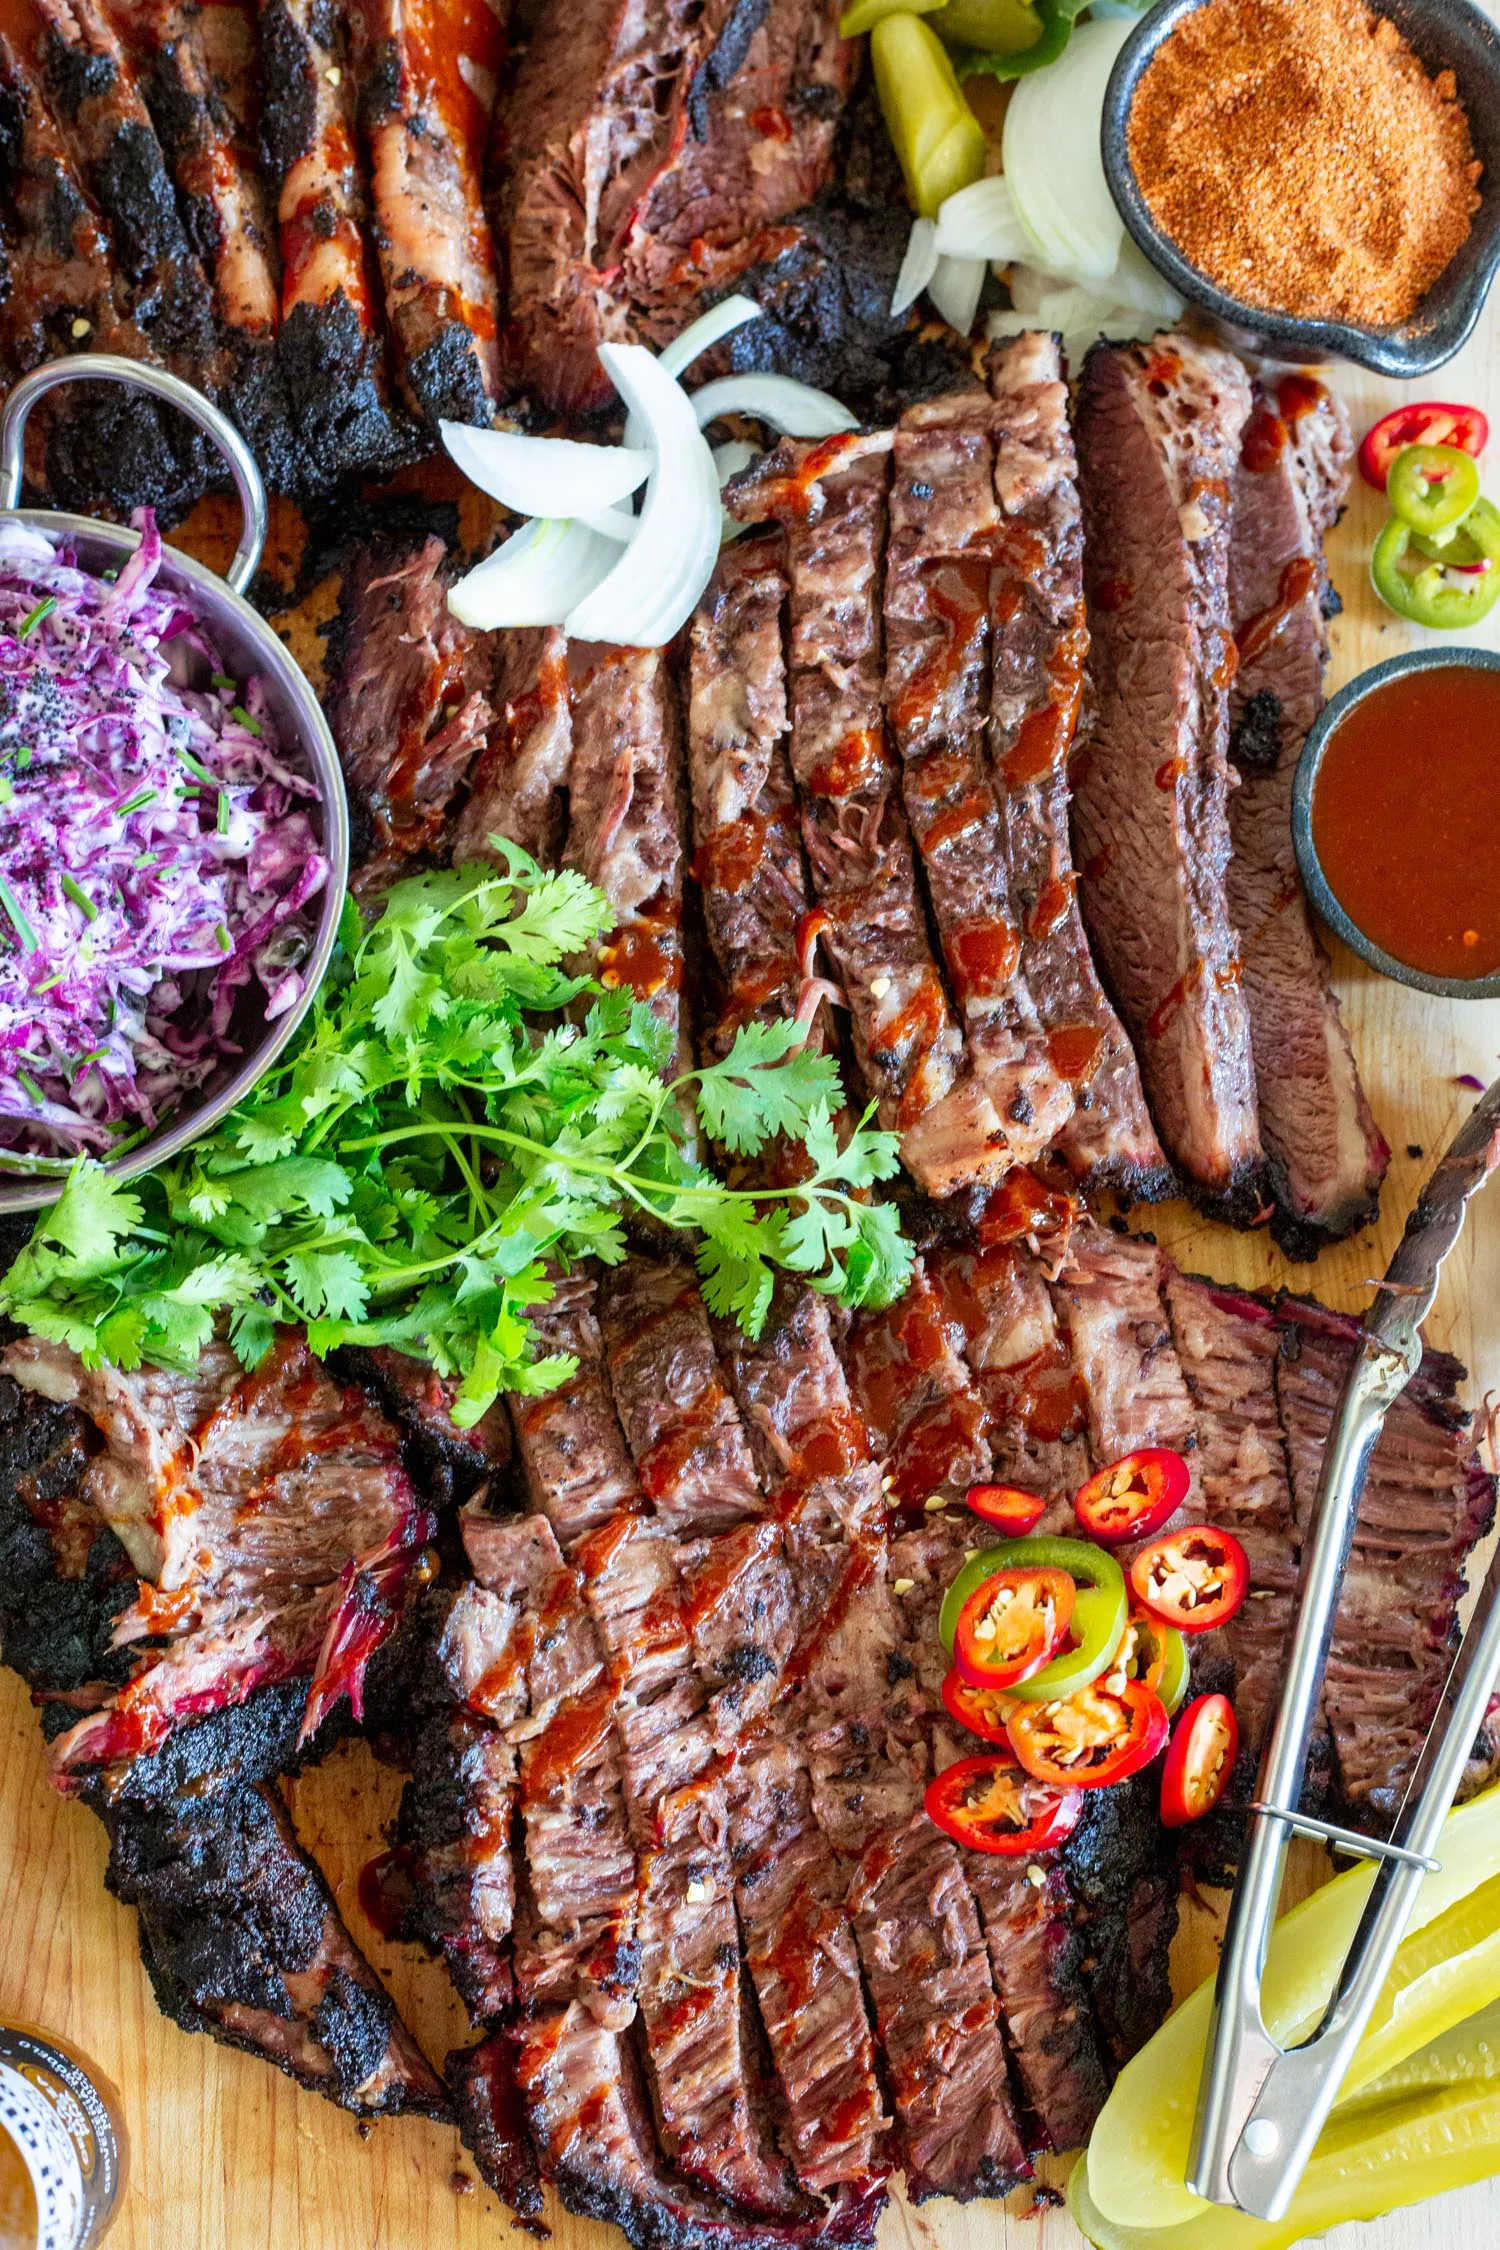 A platter of sliced brisket with coleslaw, spicy peppers, and serving utensils.